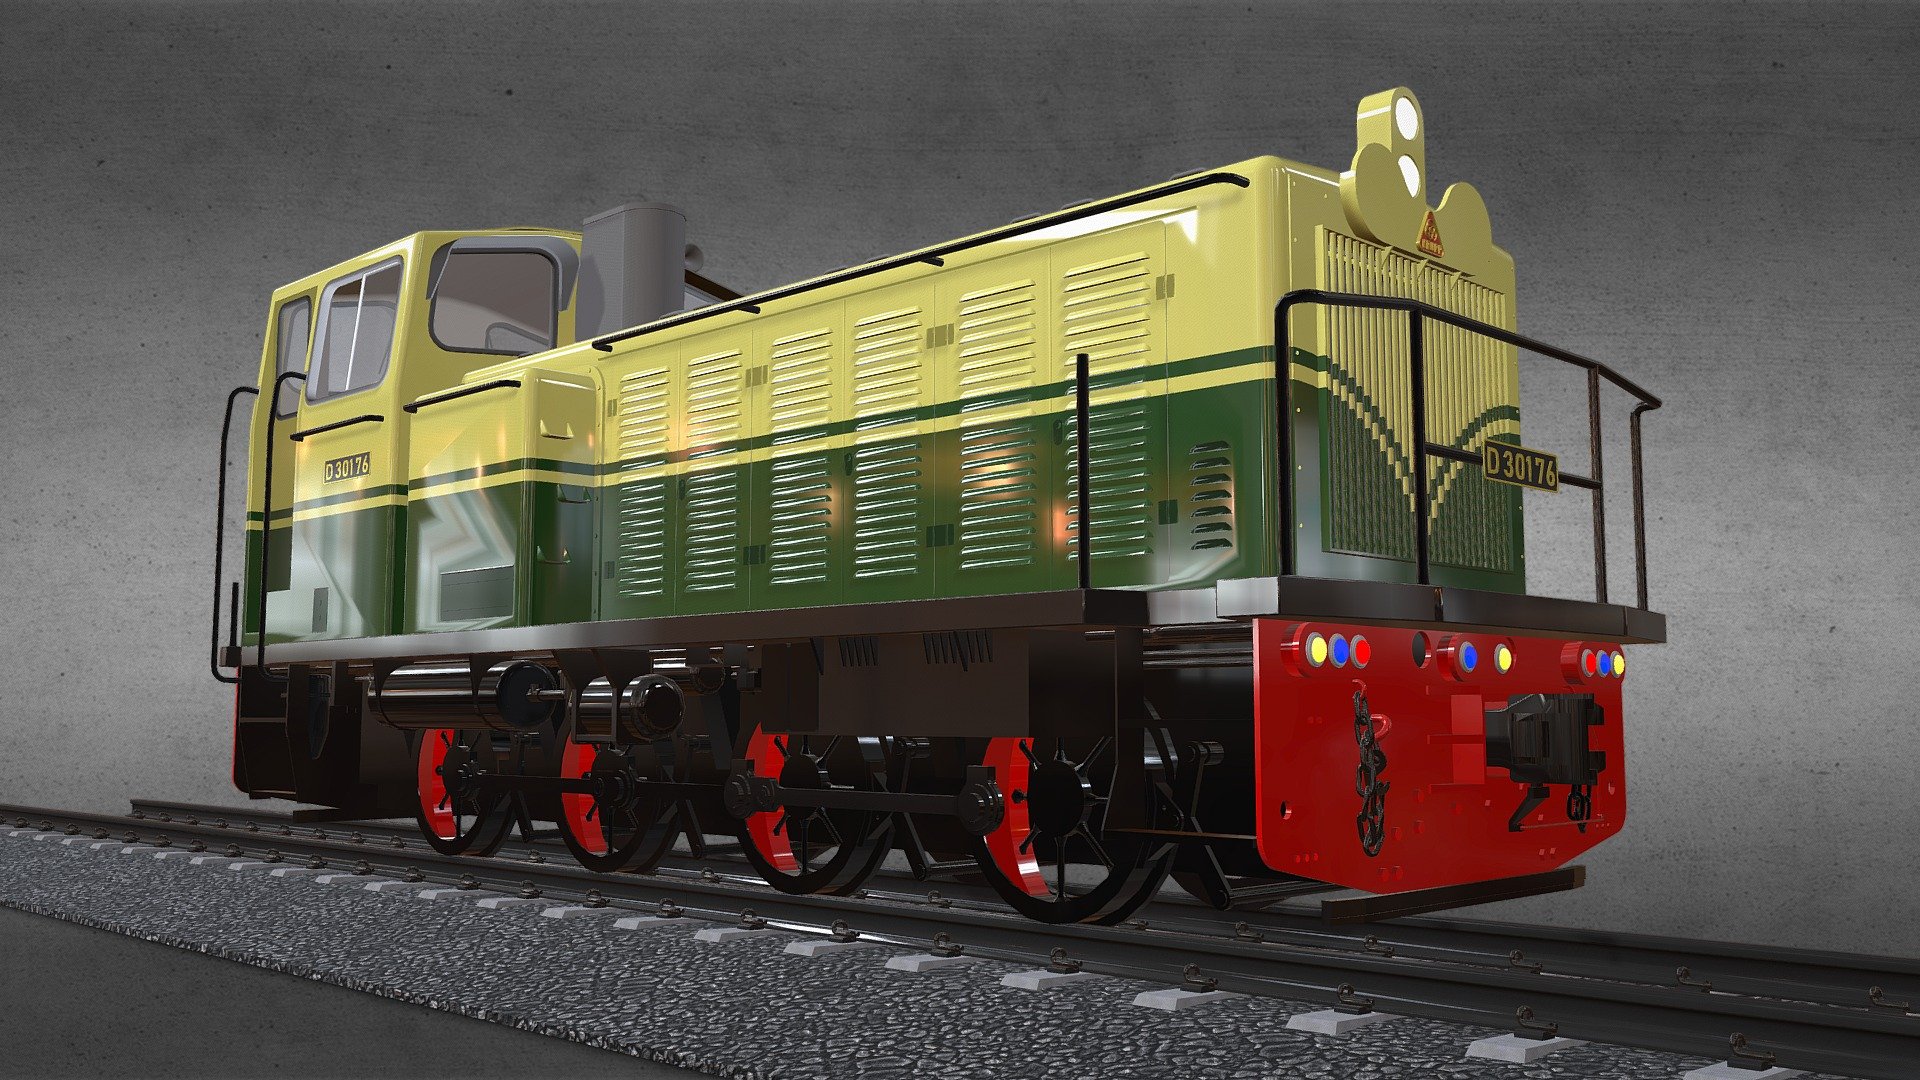 D301 (Krupp-M350D2) is a diesel hydraulic locomotives are owned by PT. KAI (Indonesian Railways Co.).

3D model created in Sketchup - D 301 (Krupp-M350D2) - Livery Vintage - 3D model by pucohensap 3d model